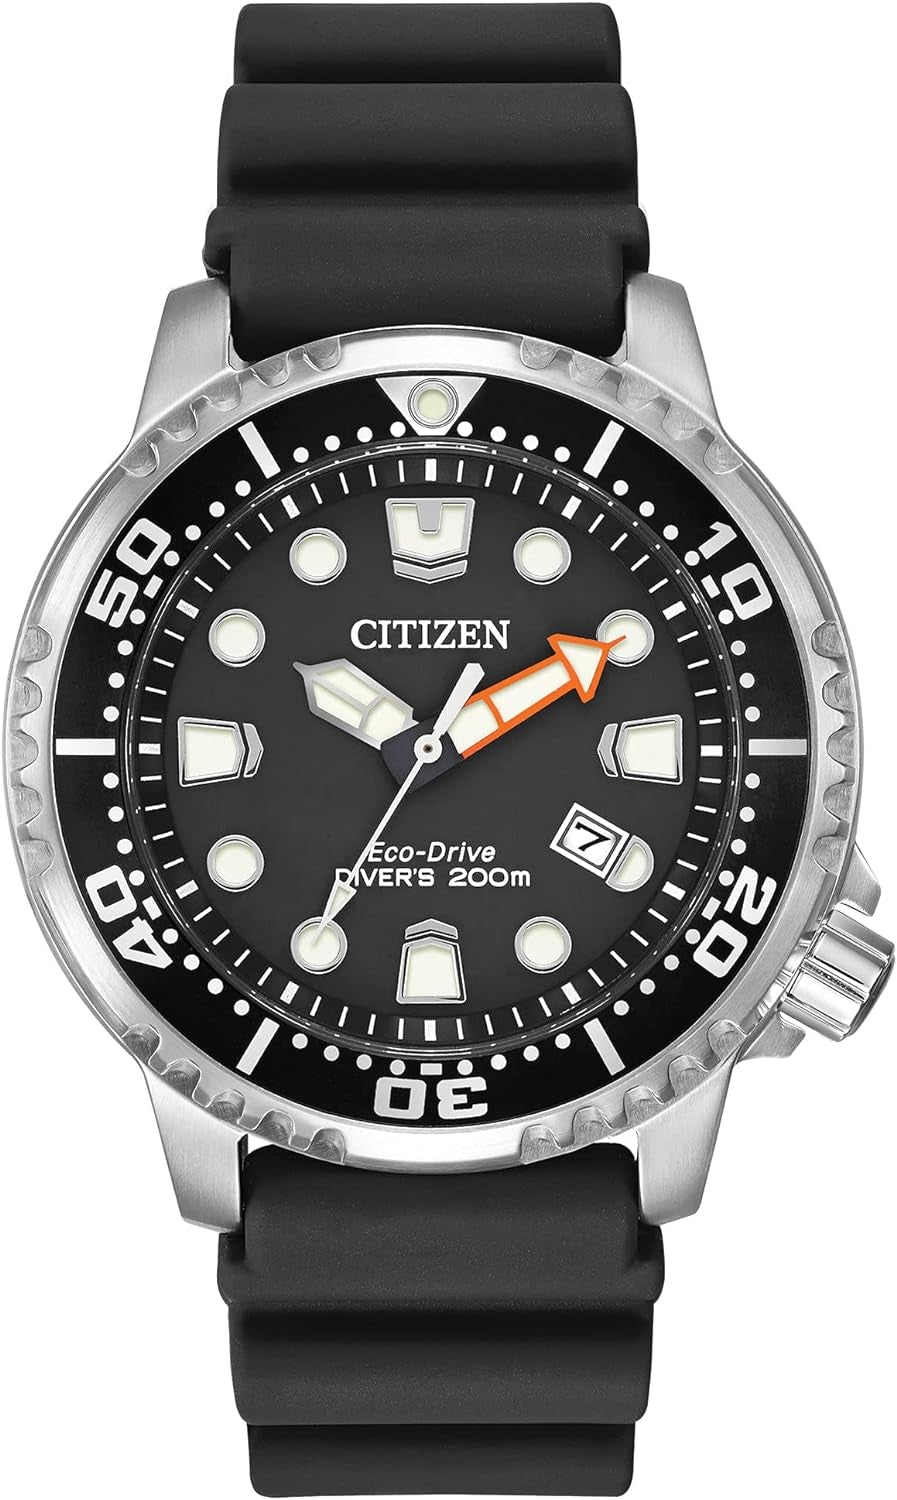 Promaster Dive Eco-Drive Watch, 3-Hand Date, ISO Certified, Luminous Hands and Markers, Rotating Bezel